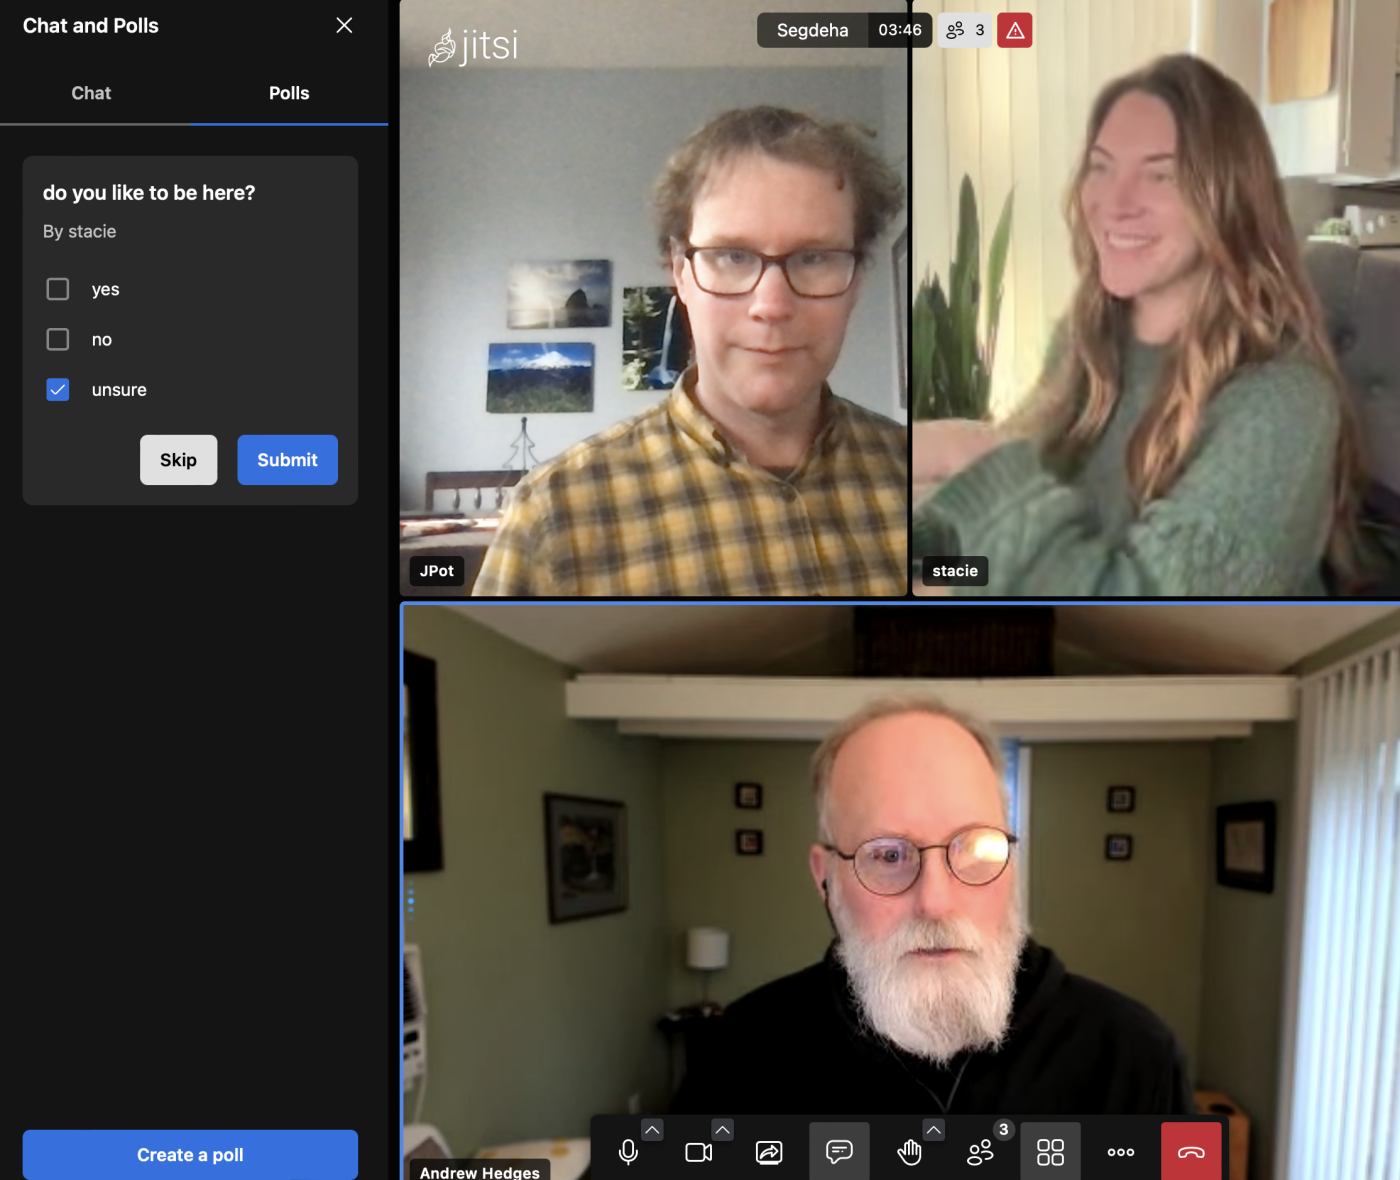 Jitsi, our pick for the best lightweight video conferencing option